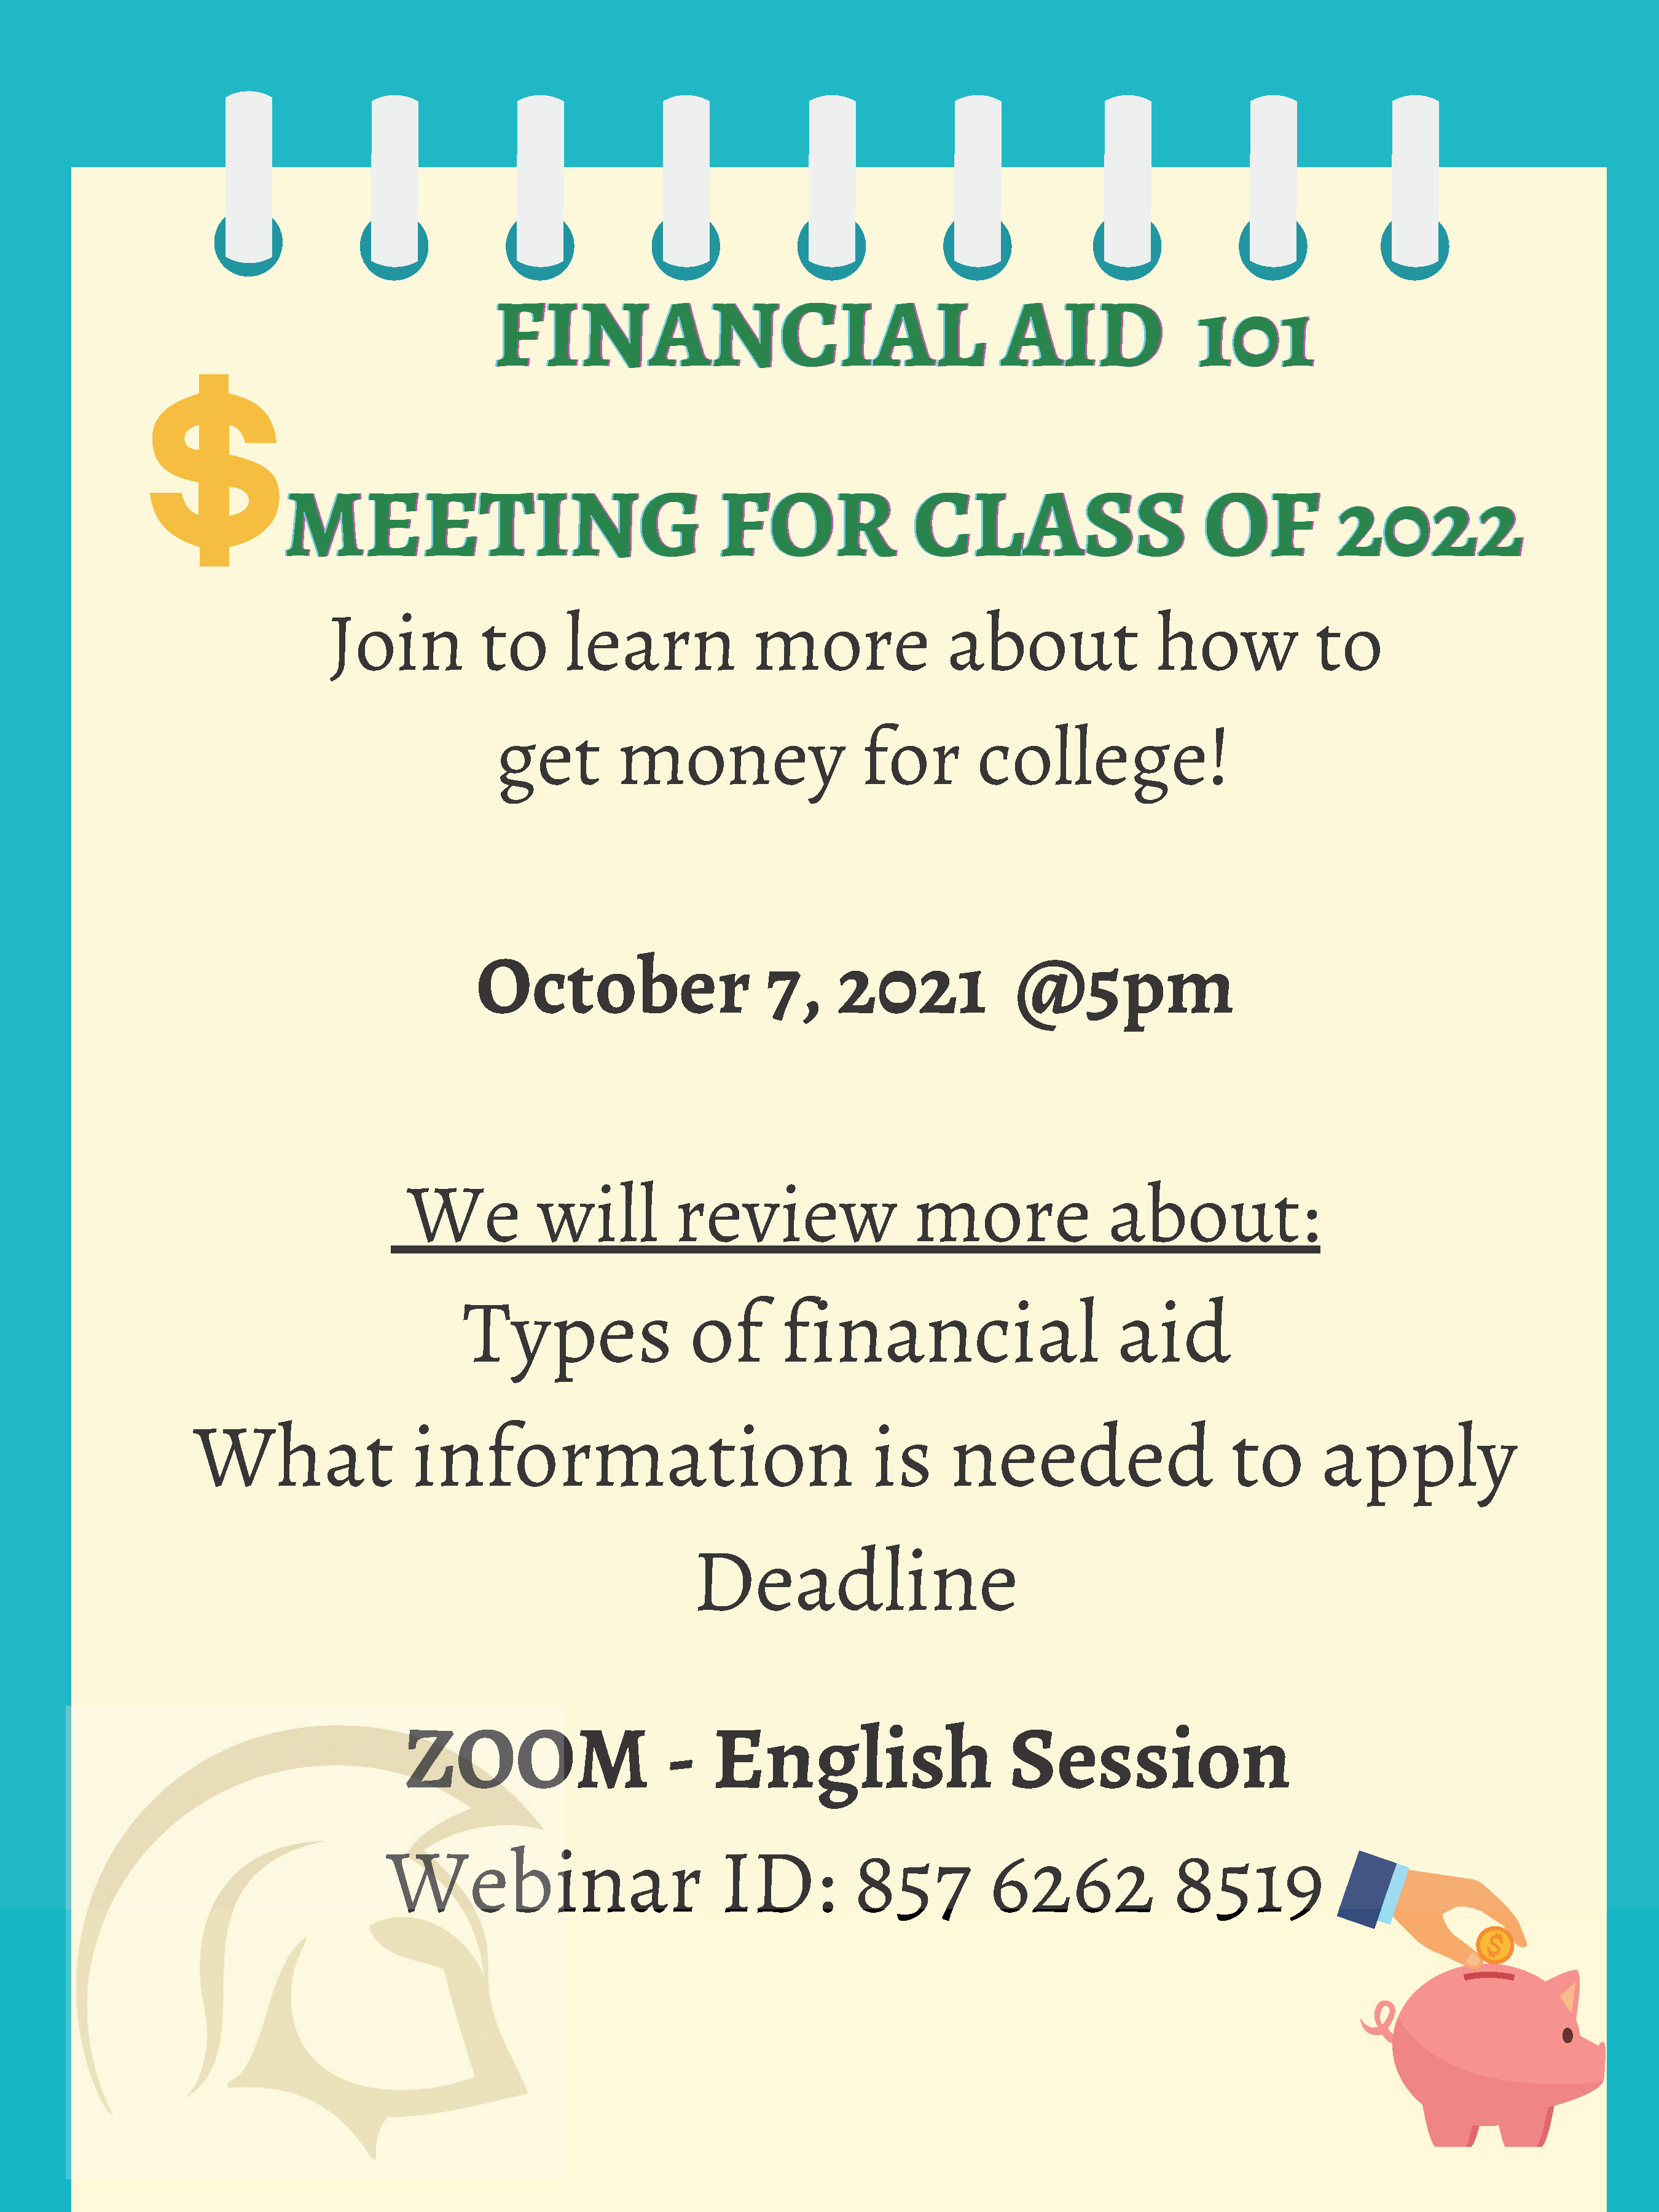 Financial Aid for Class of 2022